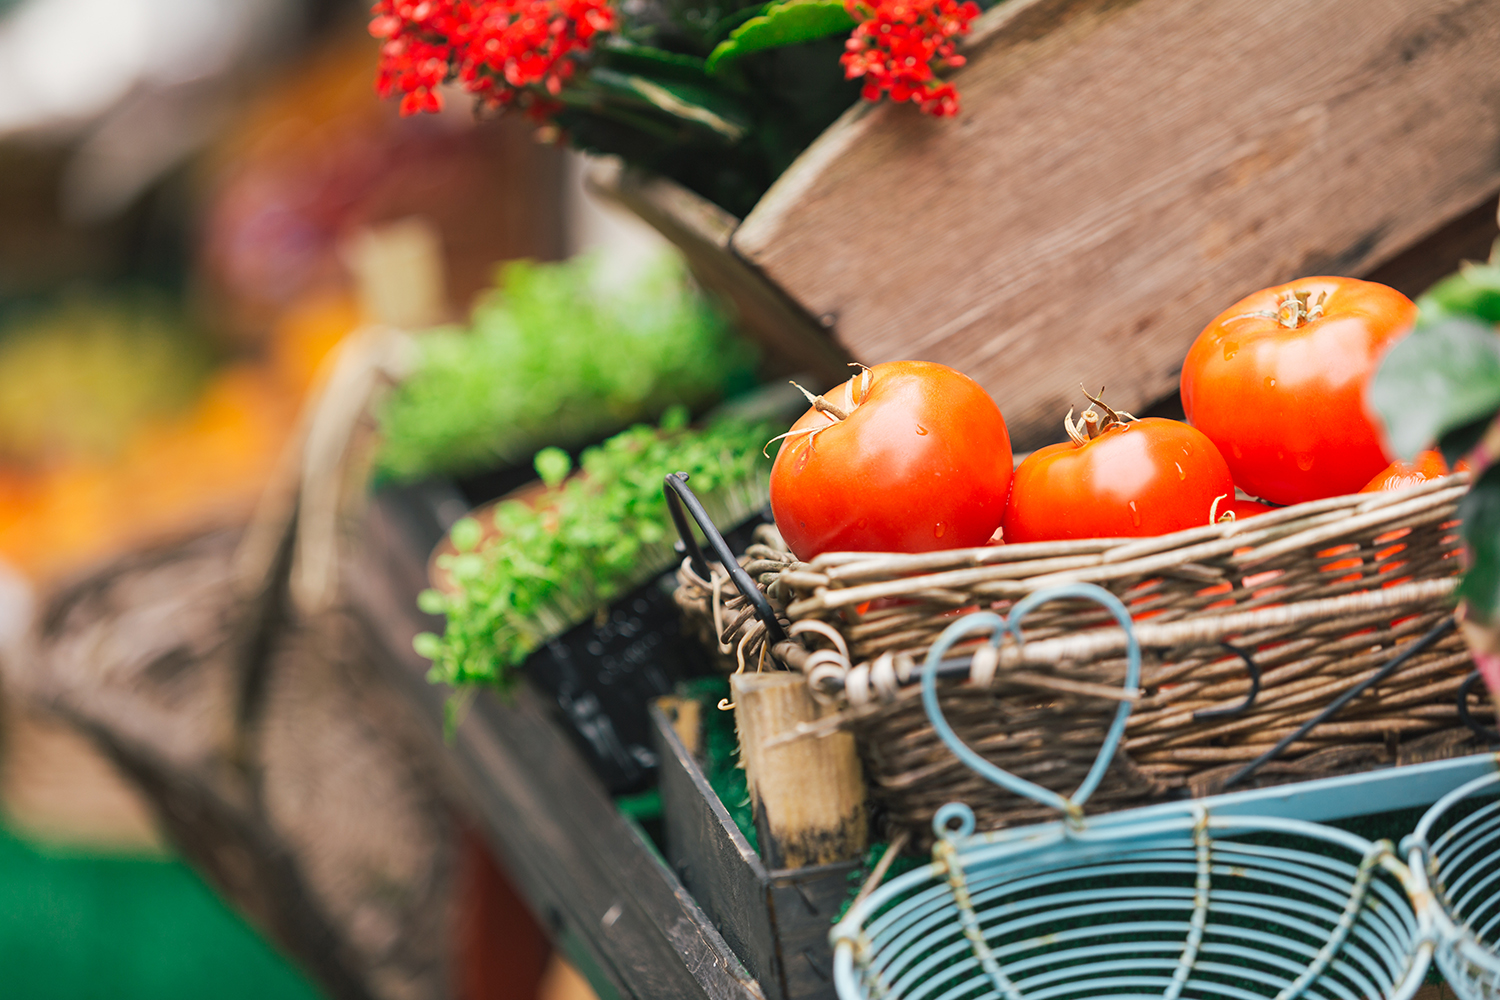 Eat with the seasons, eat fresh and support your local farmers as well as your community.